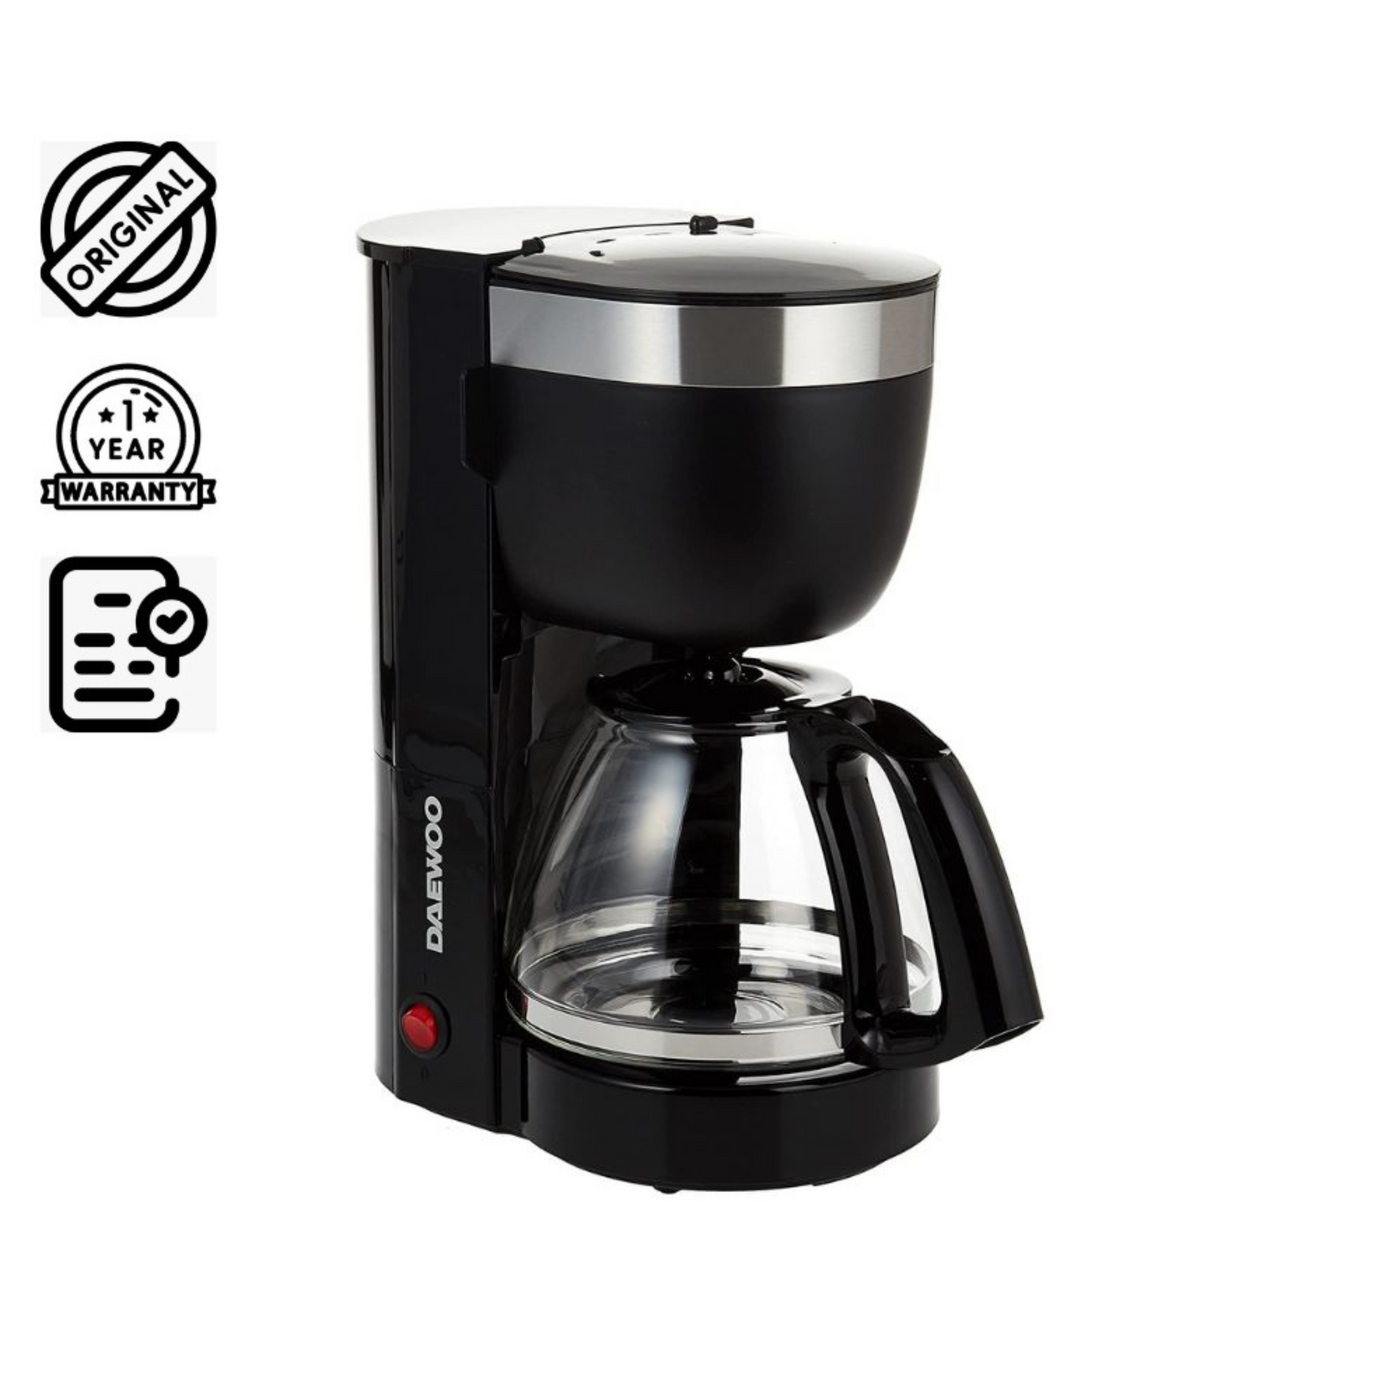 Brown Box 10 Cup Coffee Maker for Drip Coffee and Espresso